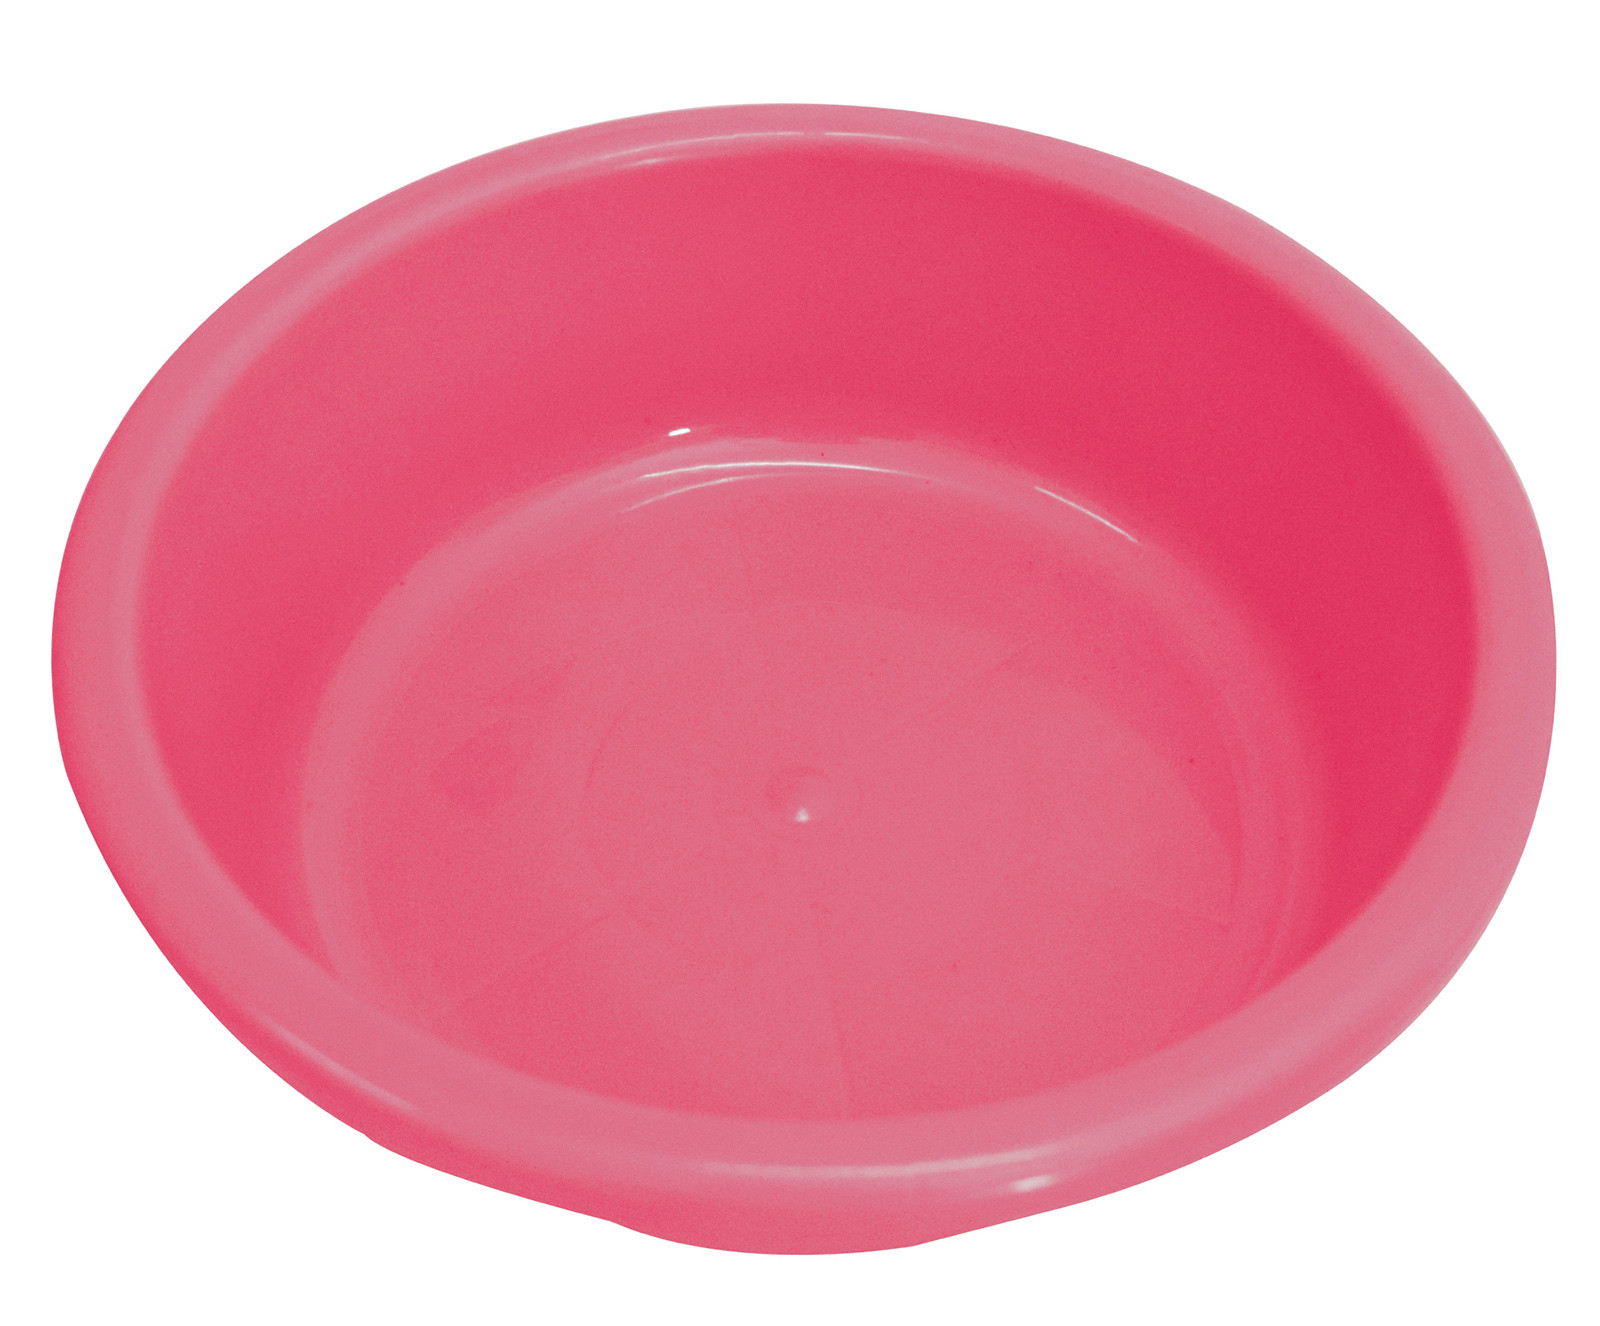 Kuber Industries Multiuses Unbreakable Plastic Knead Dough Basket/Basin Bowl For Home & Kitchen 6 Ltr- Pack of 2 (Purple & Pink)